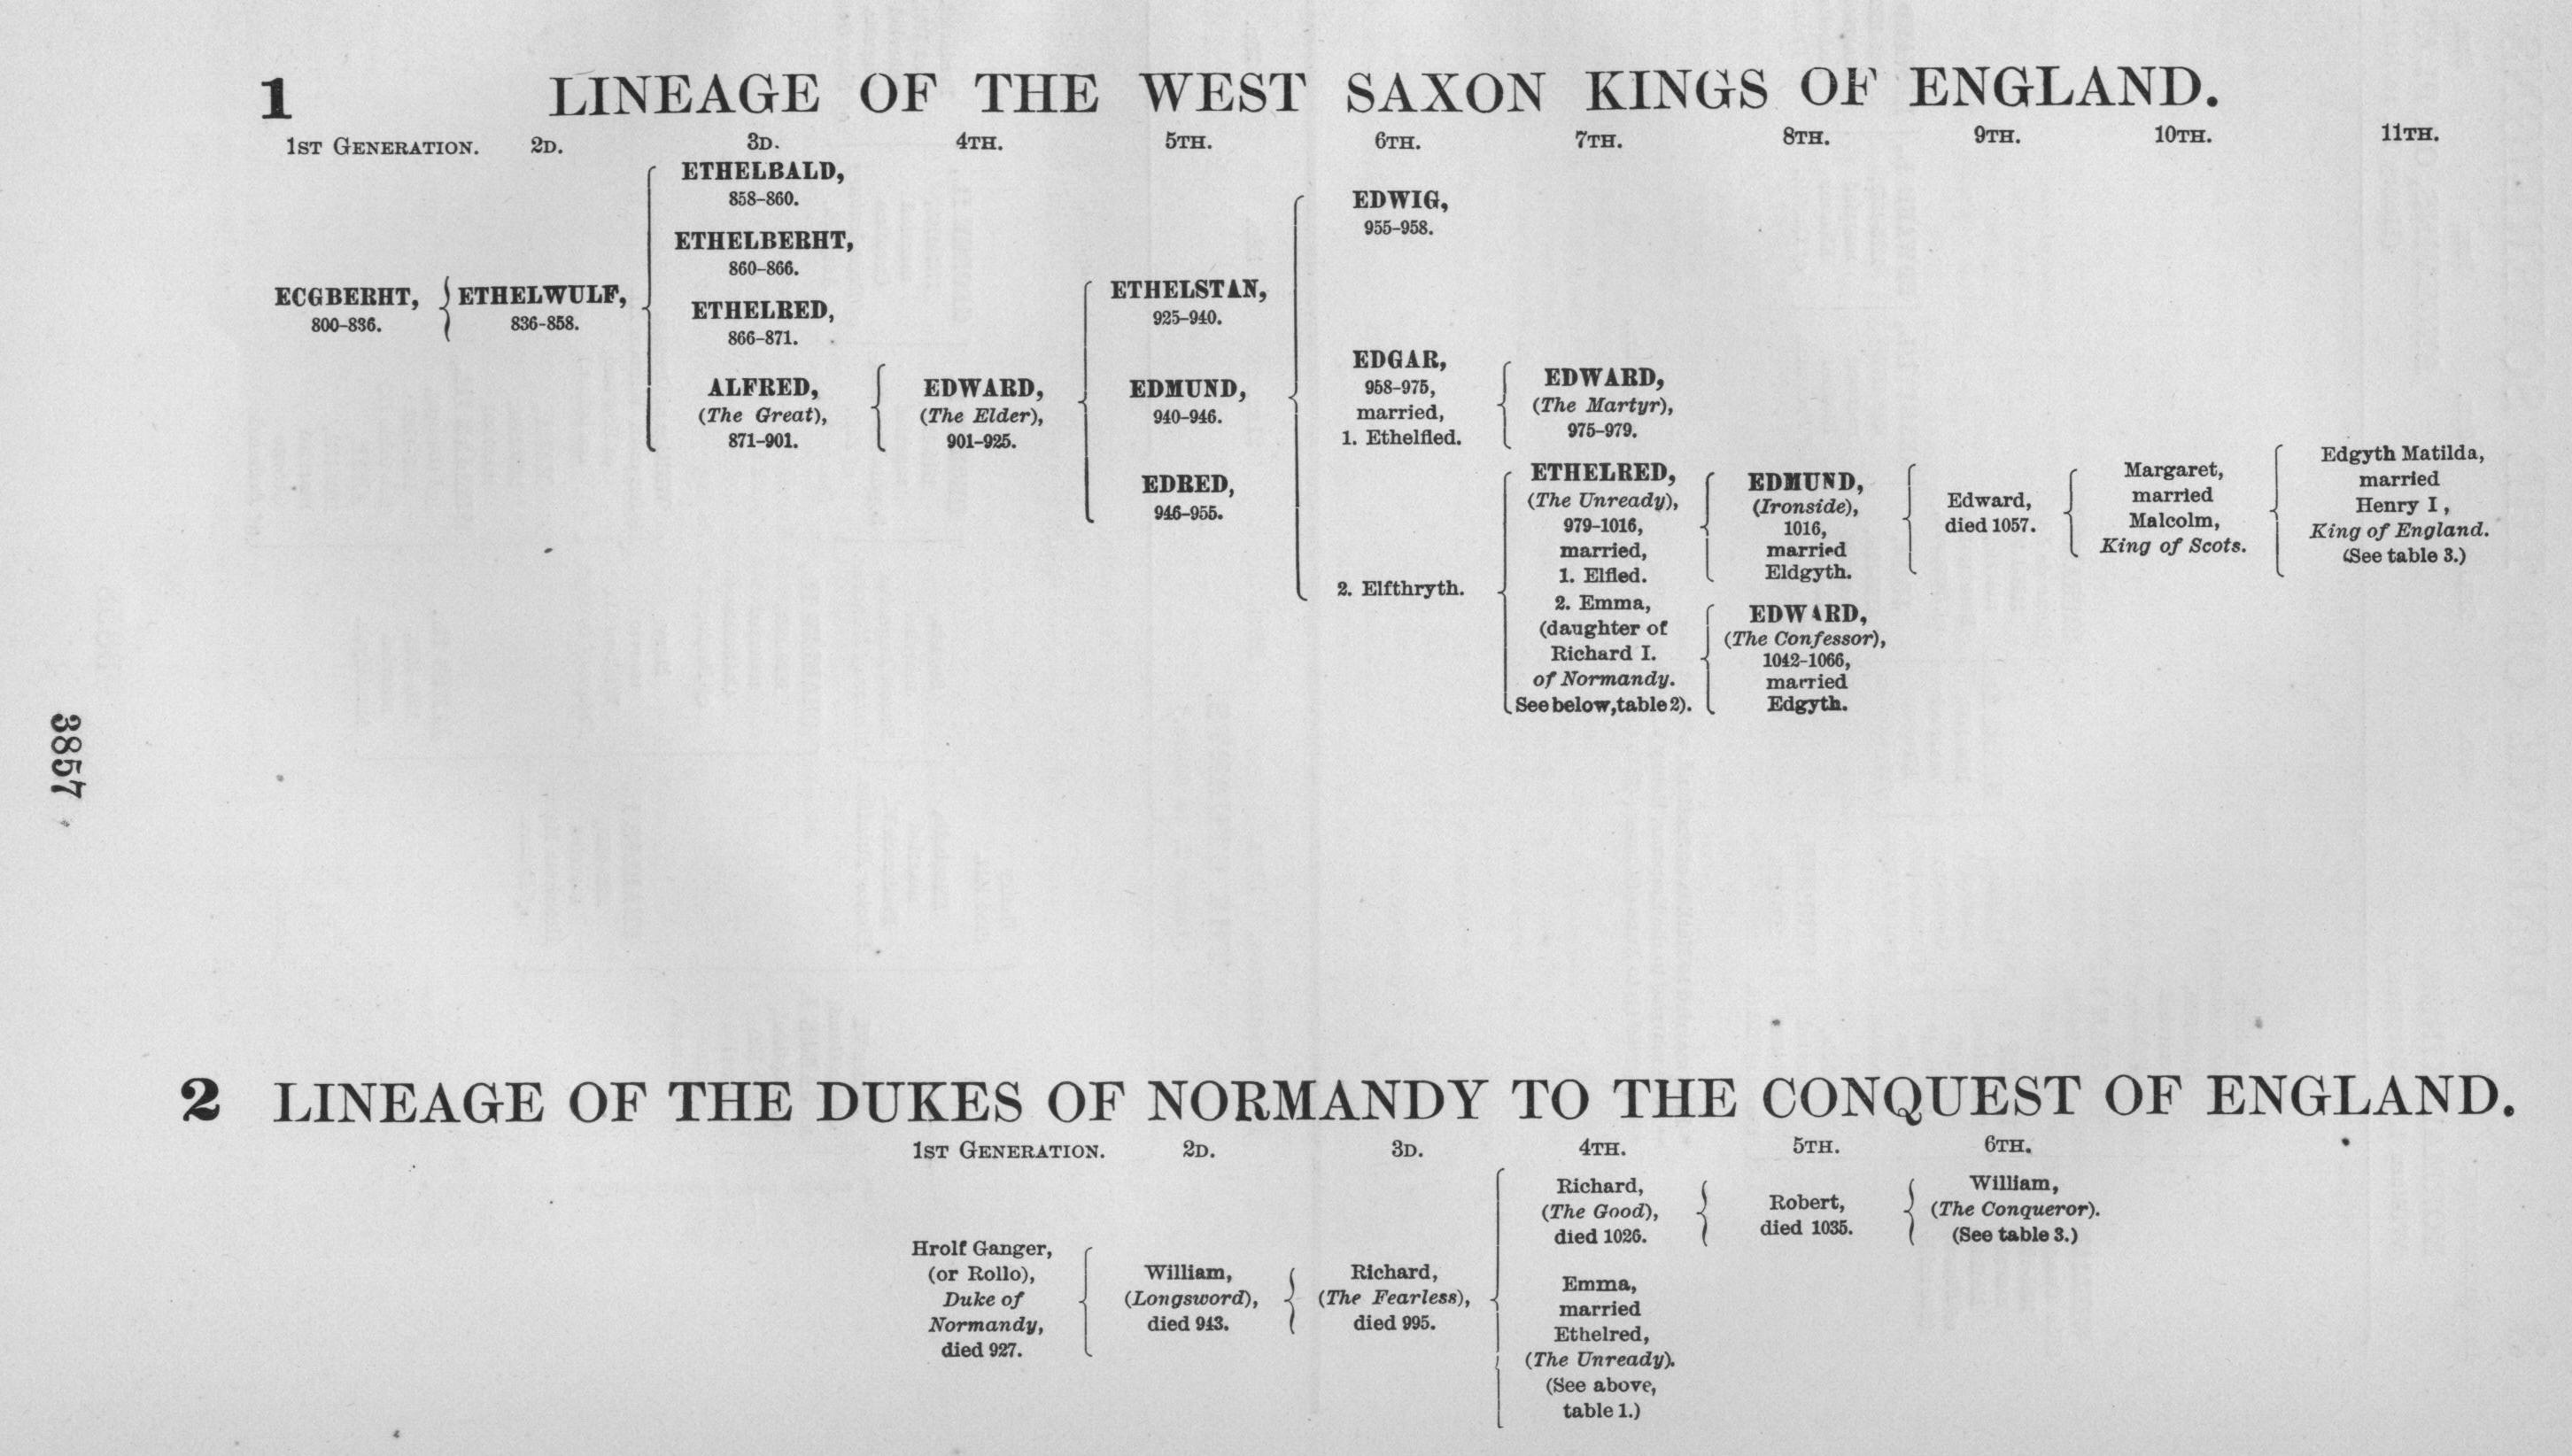 LINEAGE OF THE WEST SAXON KINGS OF ENGLAND and
 LINEAGE OF THE DUKES OF NORMANDY TO THE CONQUEST OF ENGLAND.